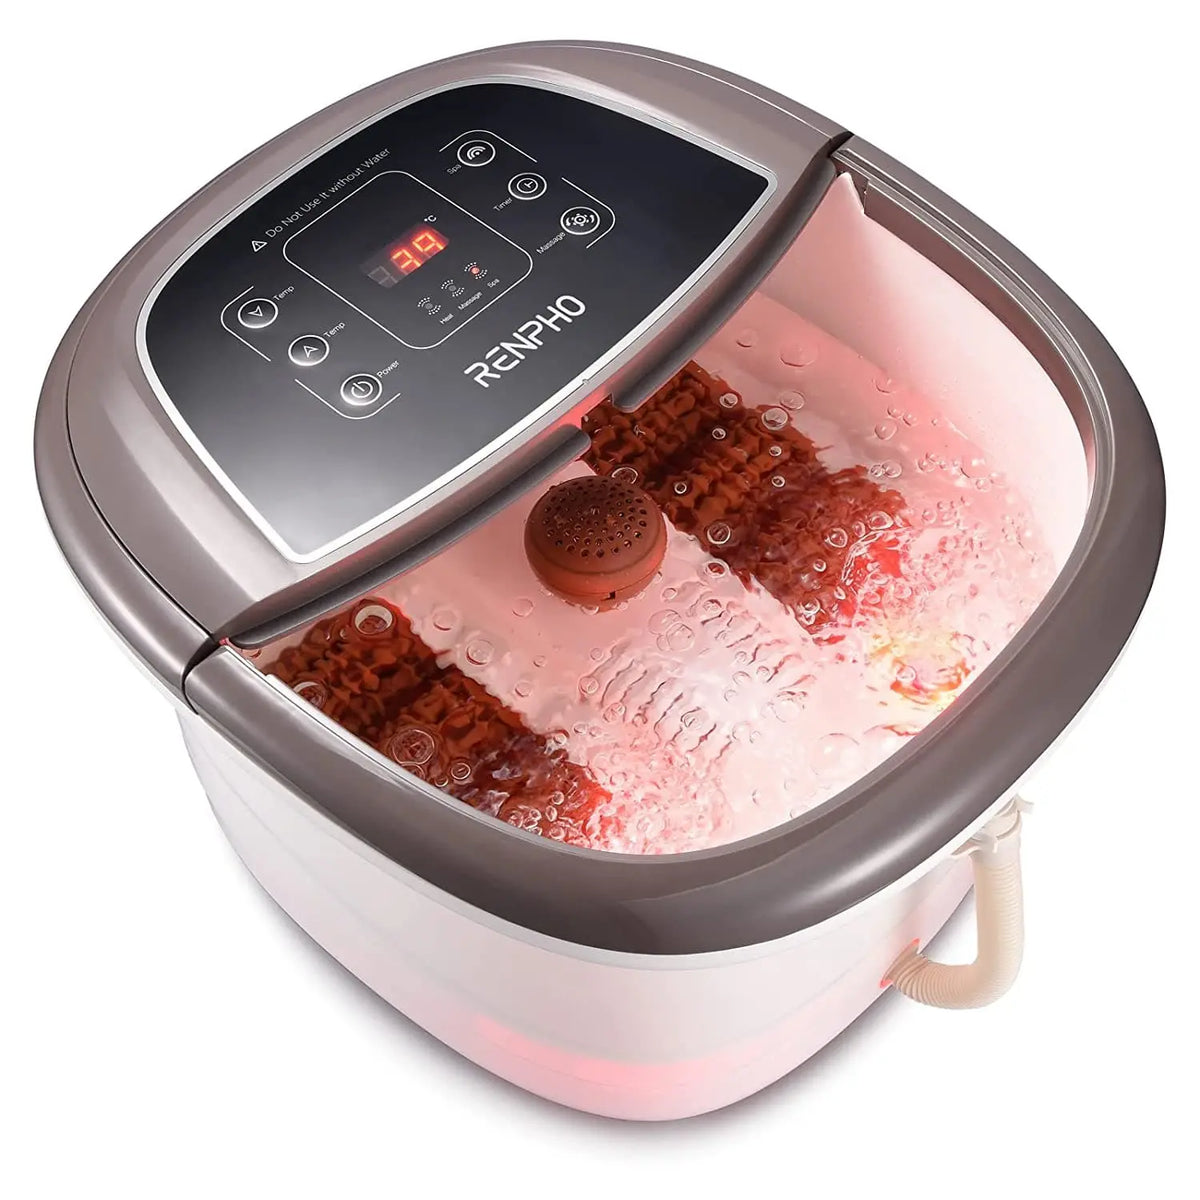 A Renpho EU Foot Spa Massager with Fast Heating is shown. The device boasts a digital display with various control buttons on a sleek black interface, including adjustable temperature settings. It is filled with water and bubbles, visible through the transparent upper section, and features a brown foot roller.